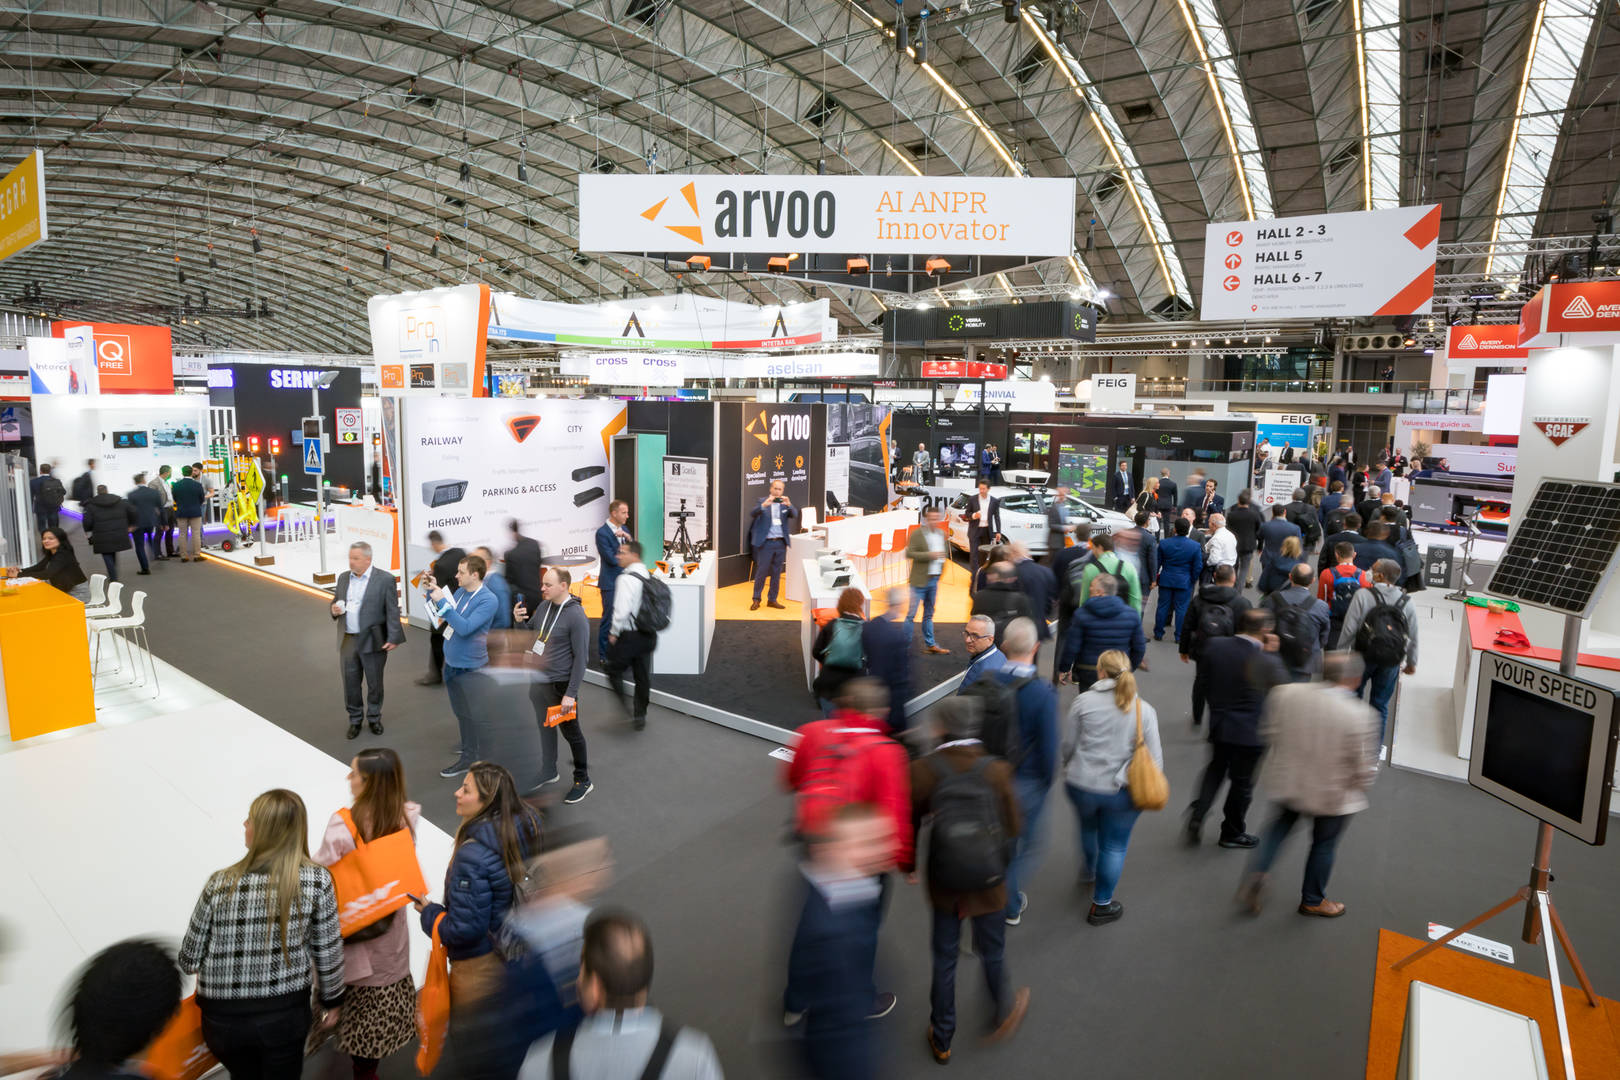 Read on for key figures and statistics from Intertraffic Amsterdam 2022